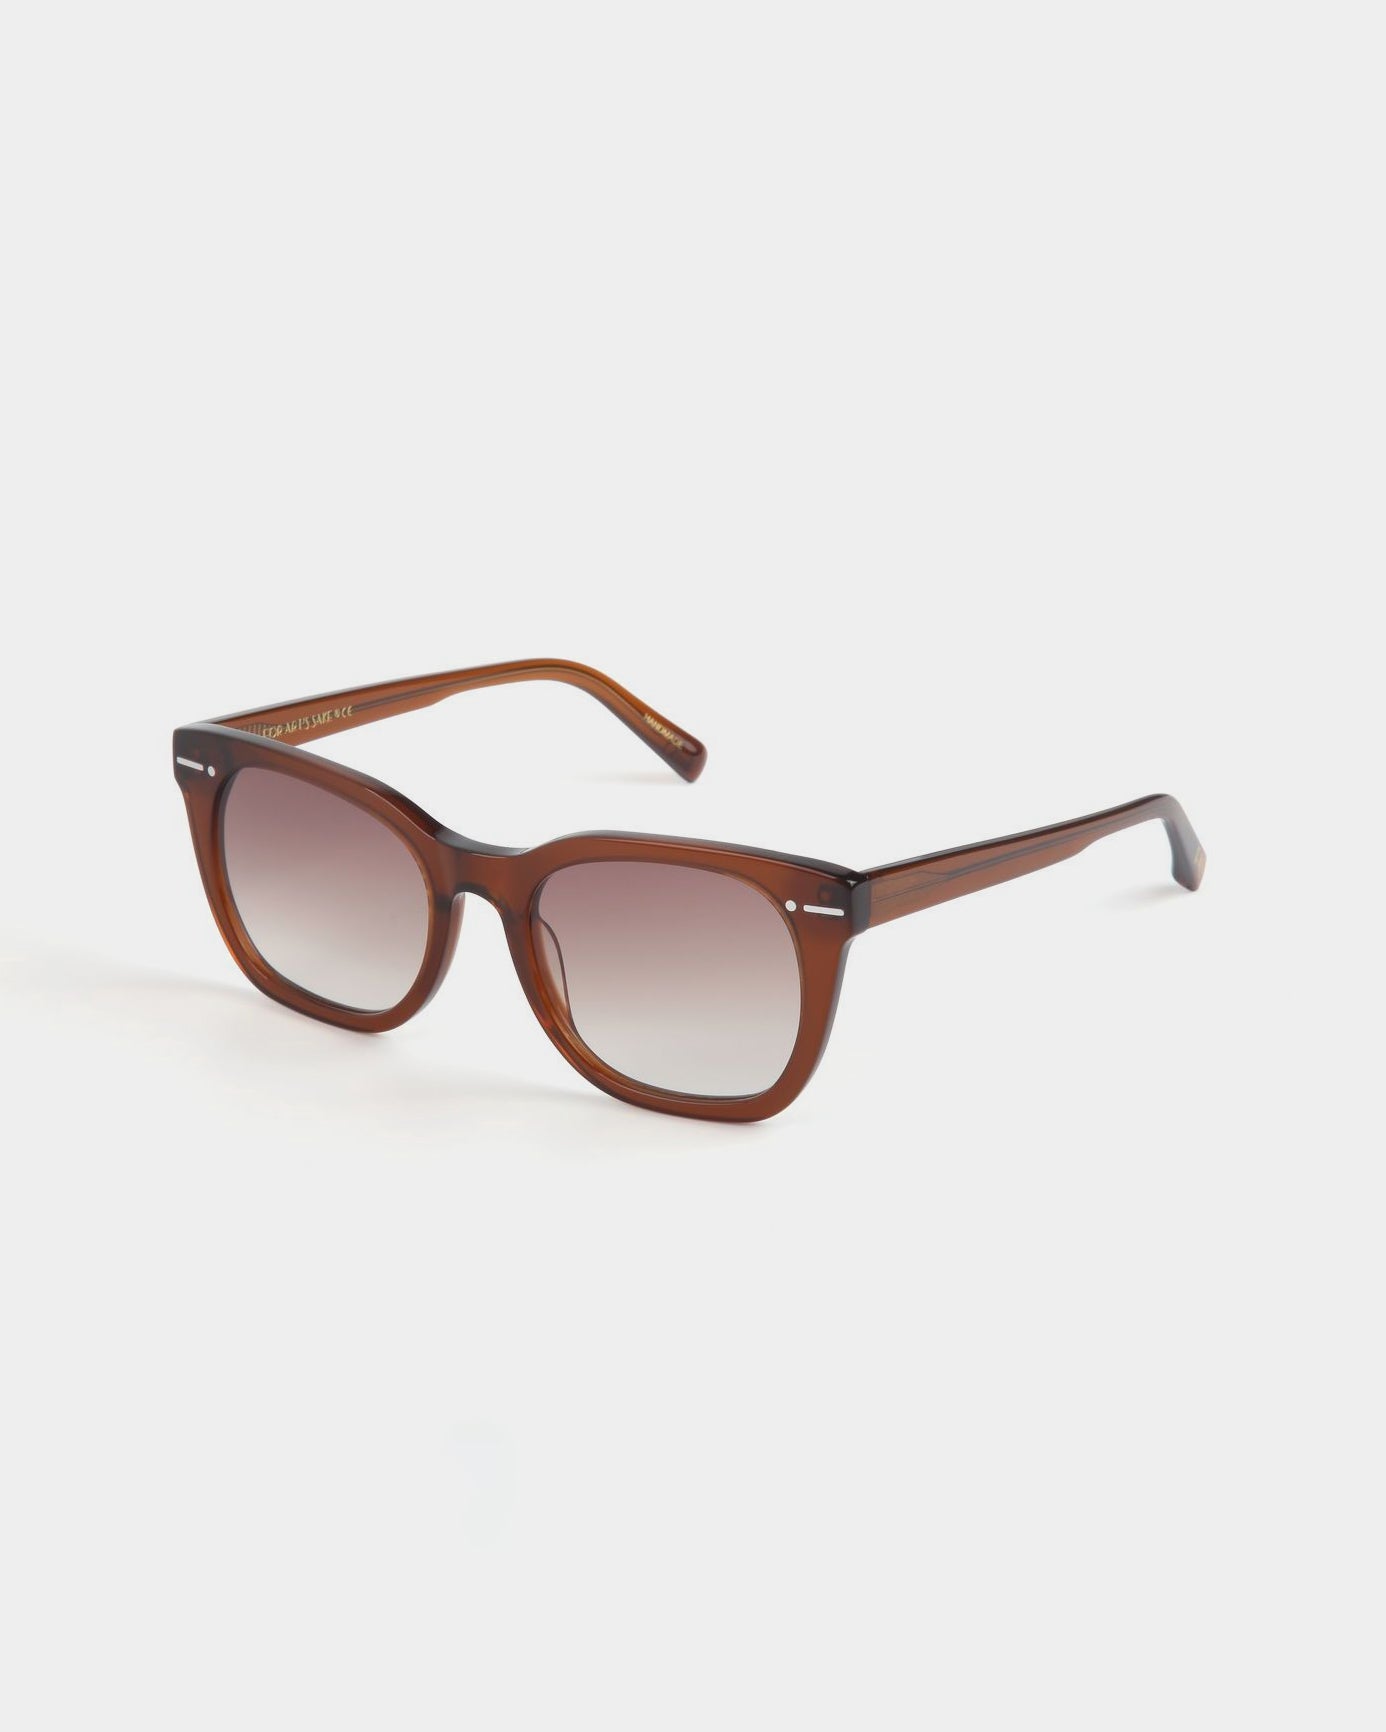 A pair of brown-framed Jacuzzi sunglasses with rectangular nylon lenses, transitioning from a solid brown tint at the top to a lighter shade at the bottom. The design is stylish and modern, featuring slightly curved arms and a glossy finish, while offering full UVA & UVB protection. The brand behind this model is For Art's Sake®.